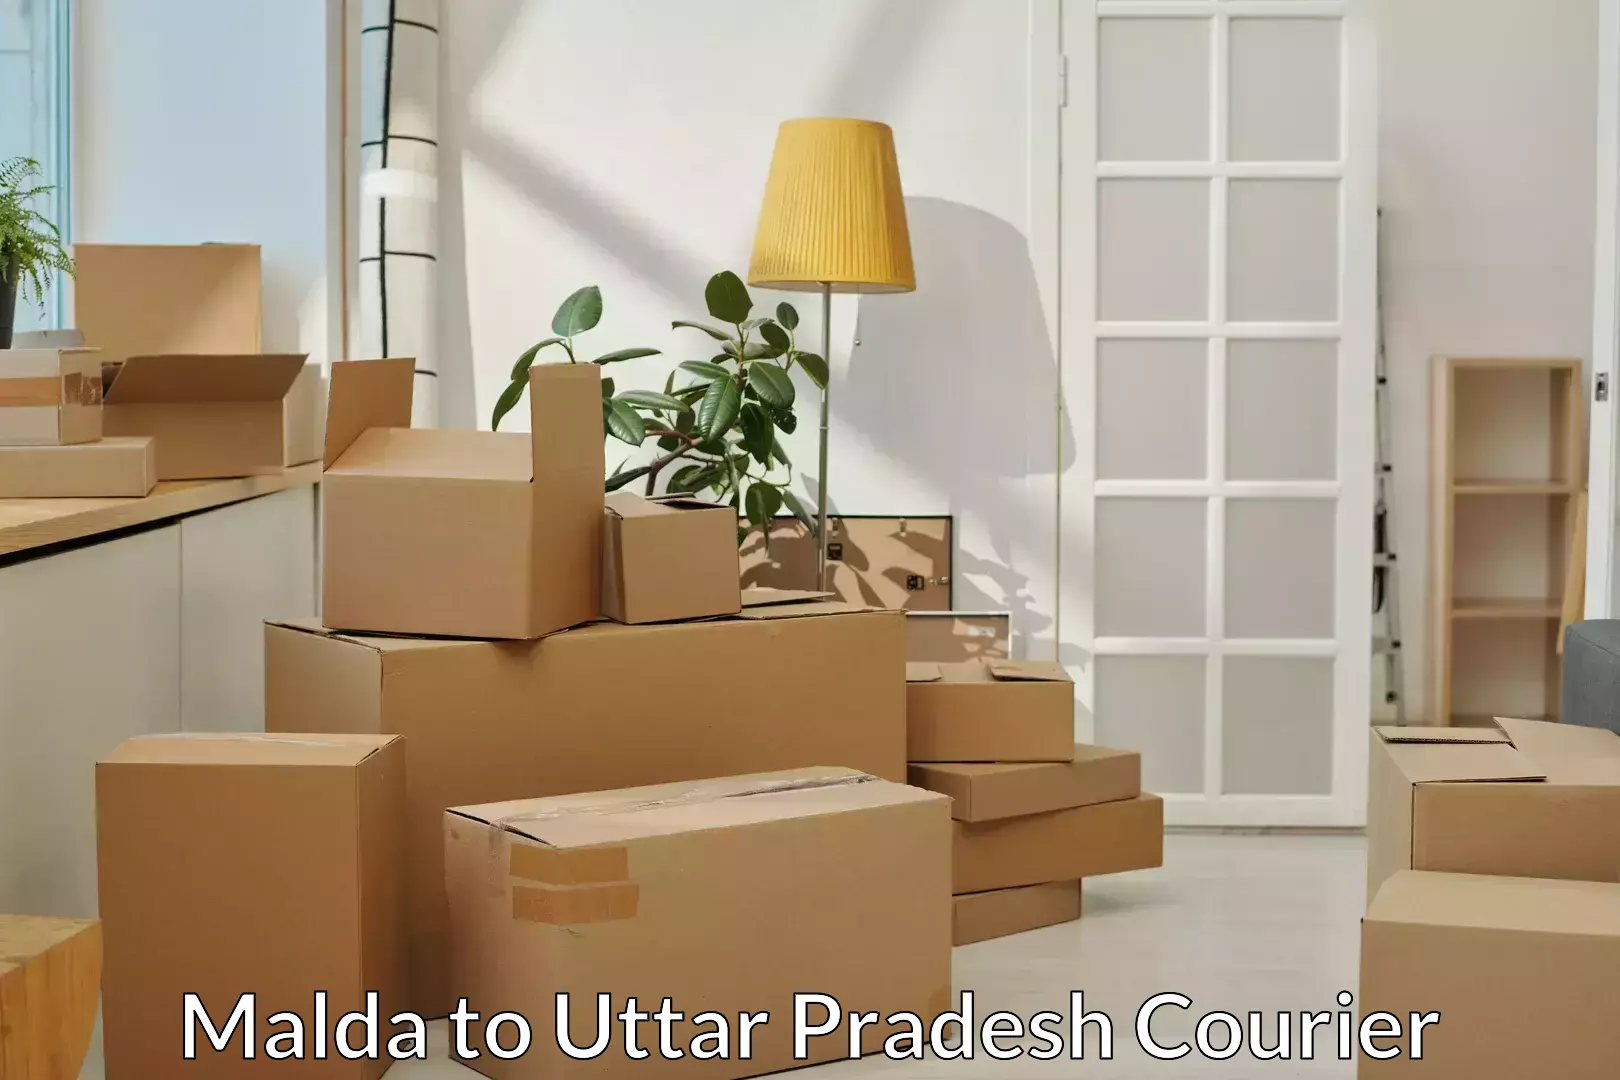 Professional movers and packers Malda to Aligarh